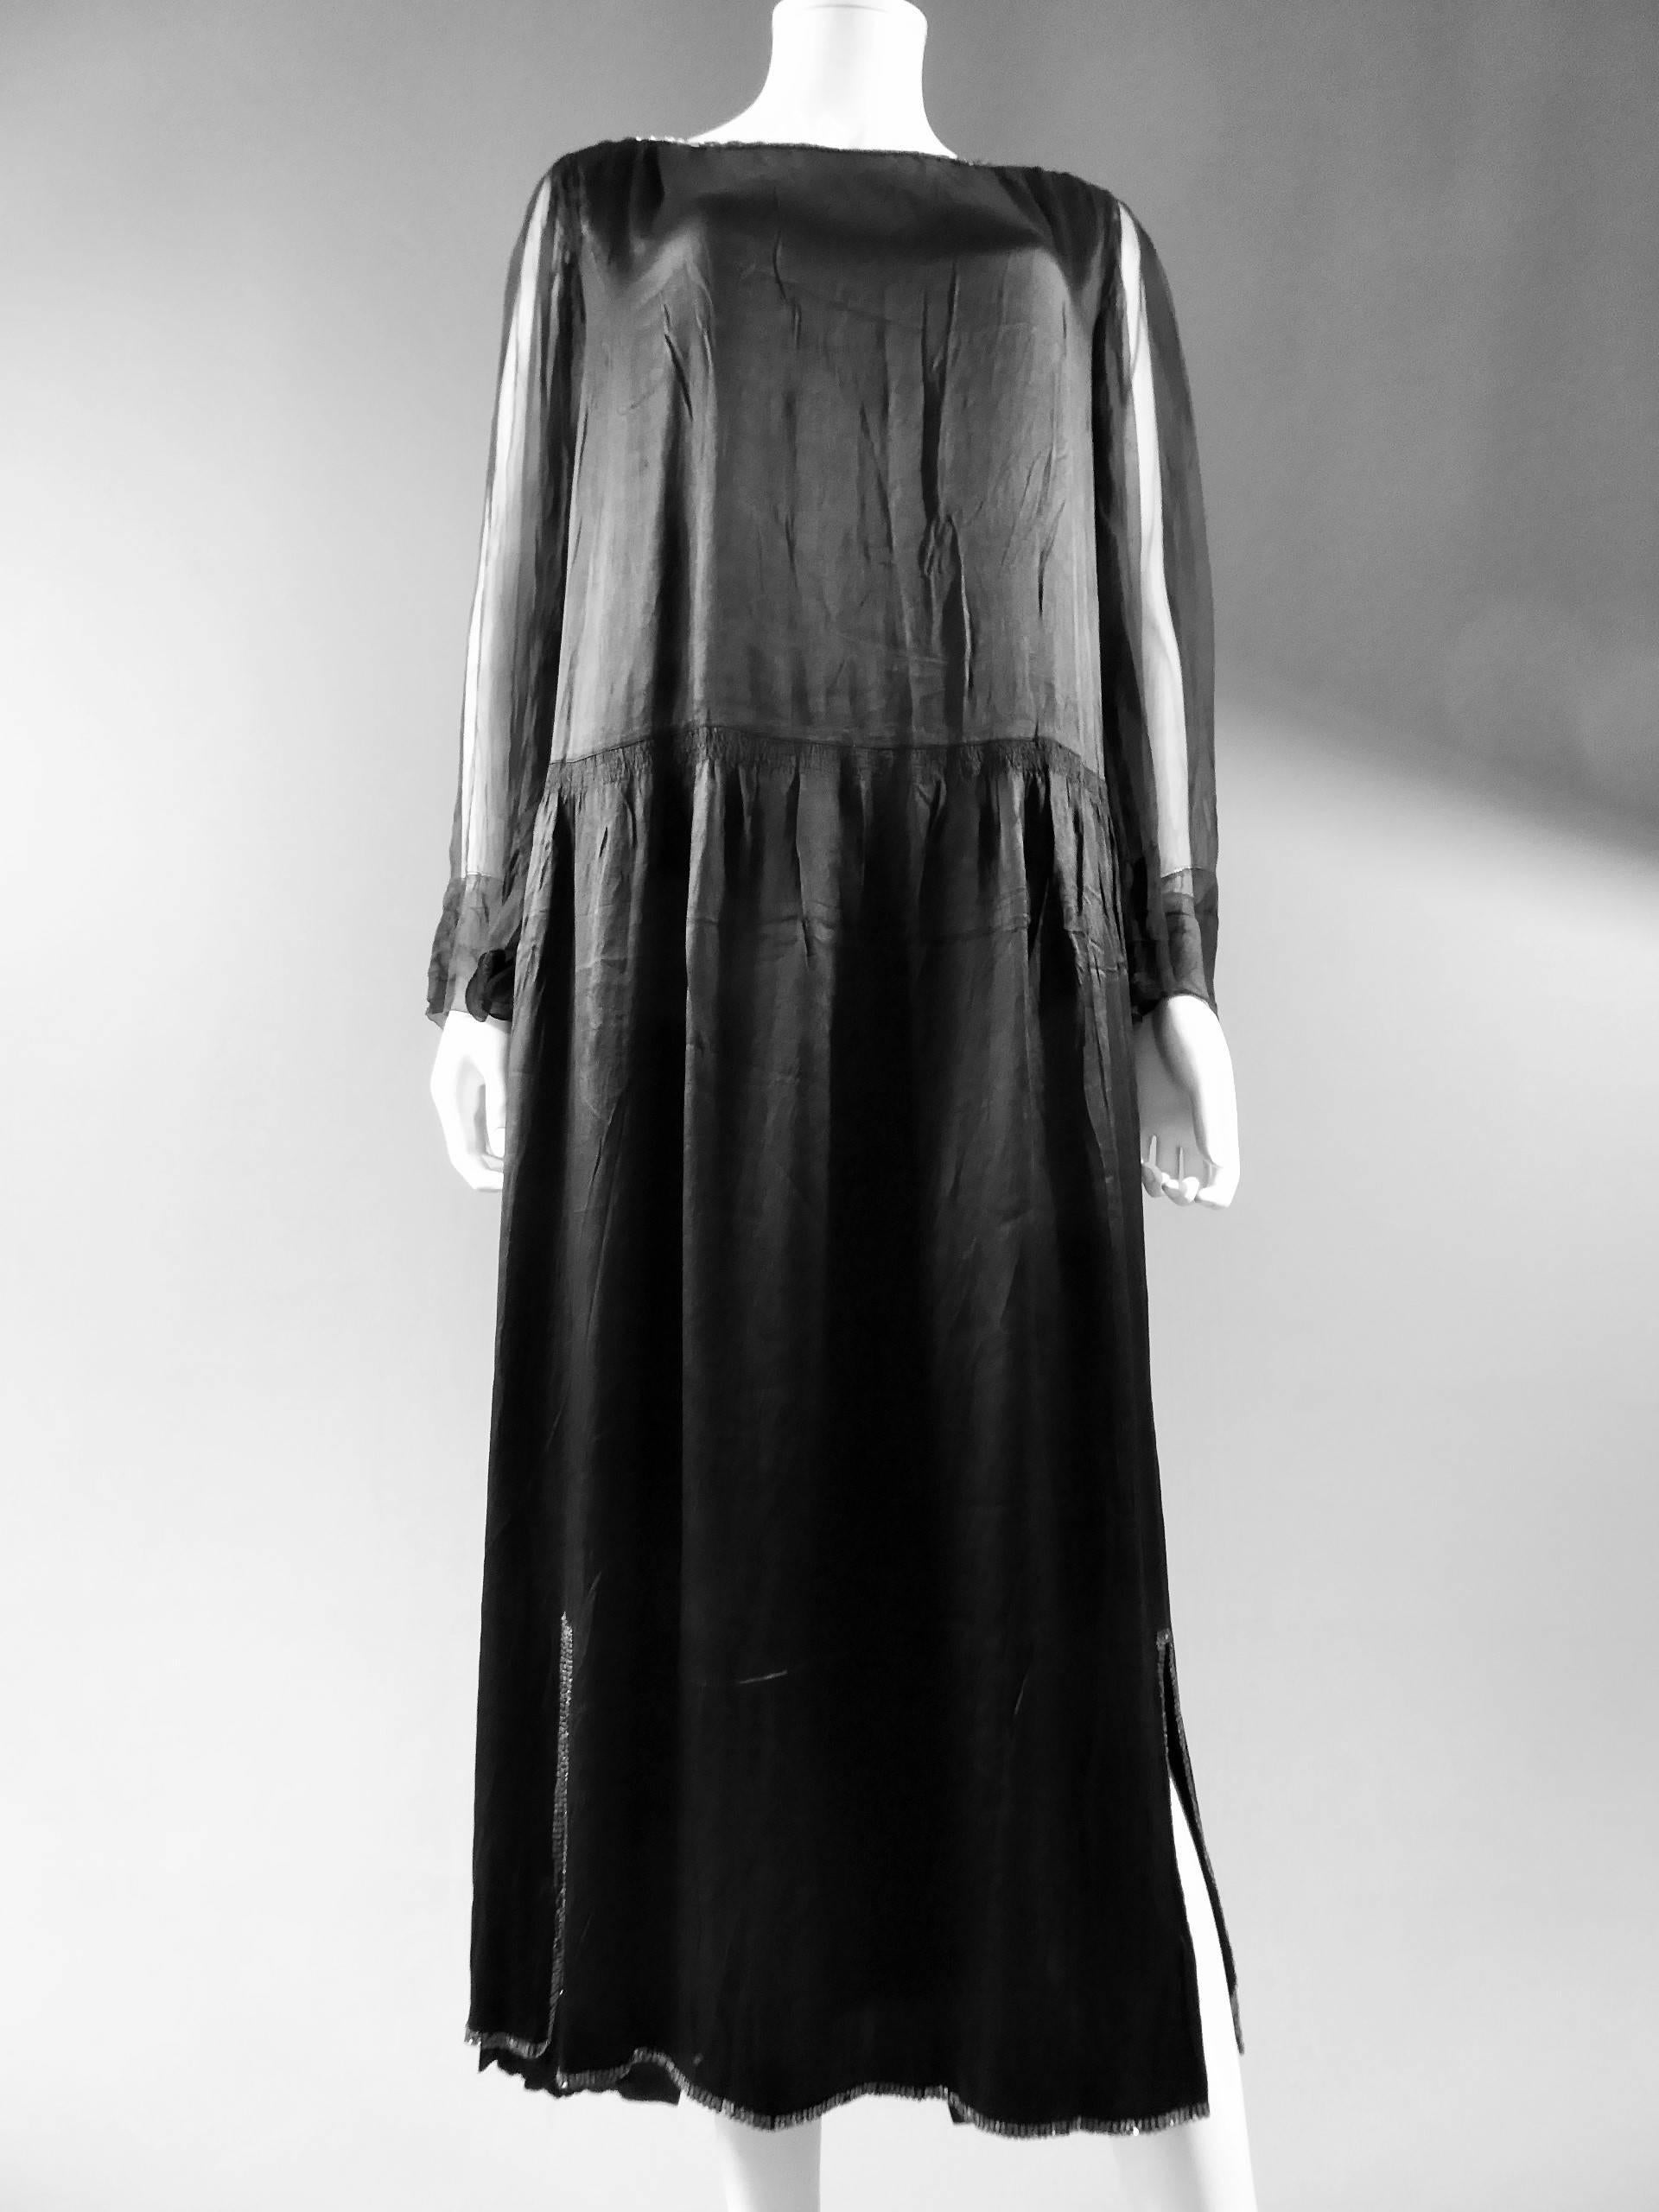 Winter 1920-1921

France.

Long dress in black silk crepe by Jeanne Lanvin Haute Couture. Wide shape with back of the dress longer than the front. Fitting the skirt, split on the sides on the bottom, with 7 rows of gathers mounted at the front